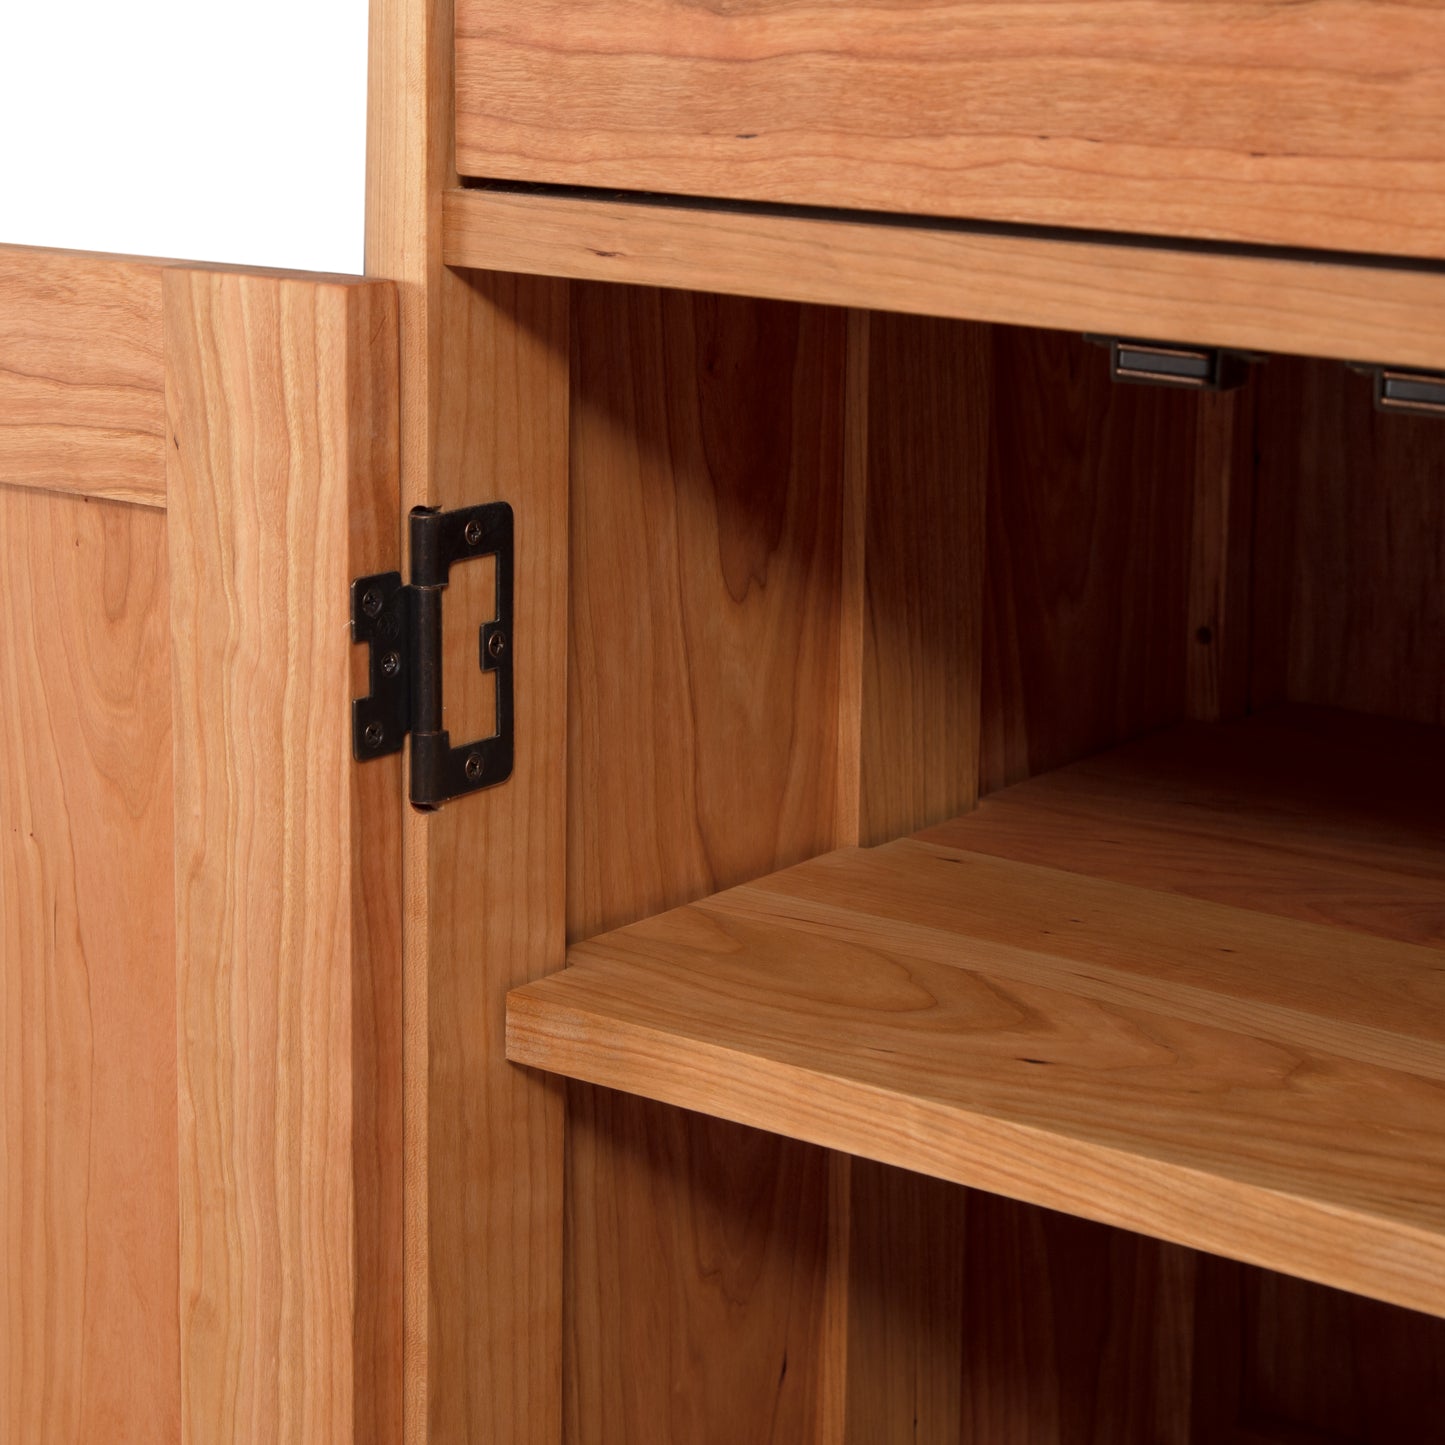 Close-up of a Vermont Furniture Designs Heartwood Shaker Short Storage Chest with an open door revealing the hinges and interior shelves.